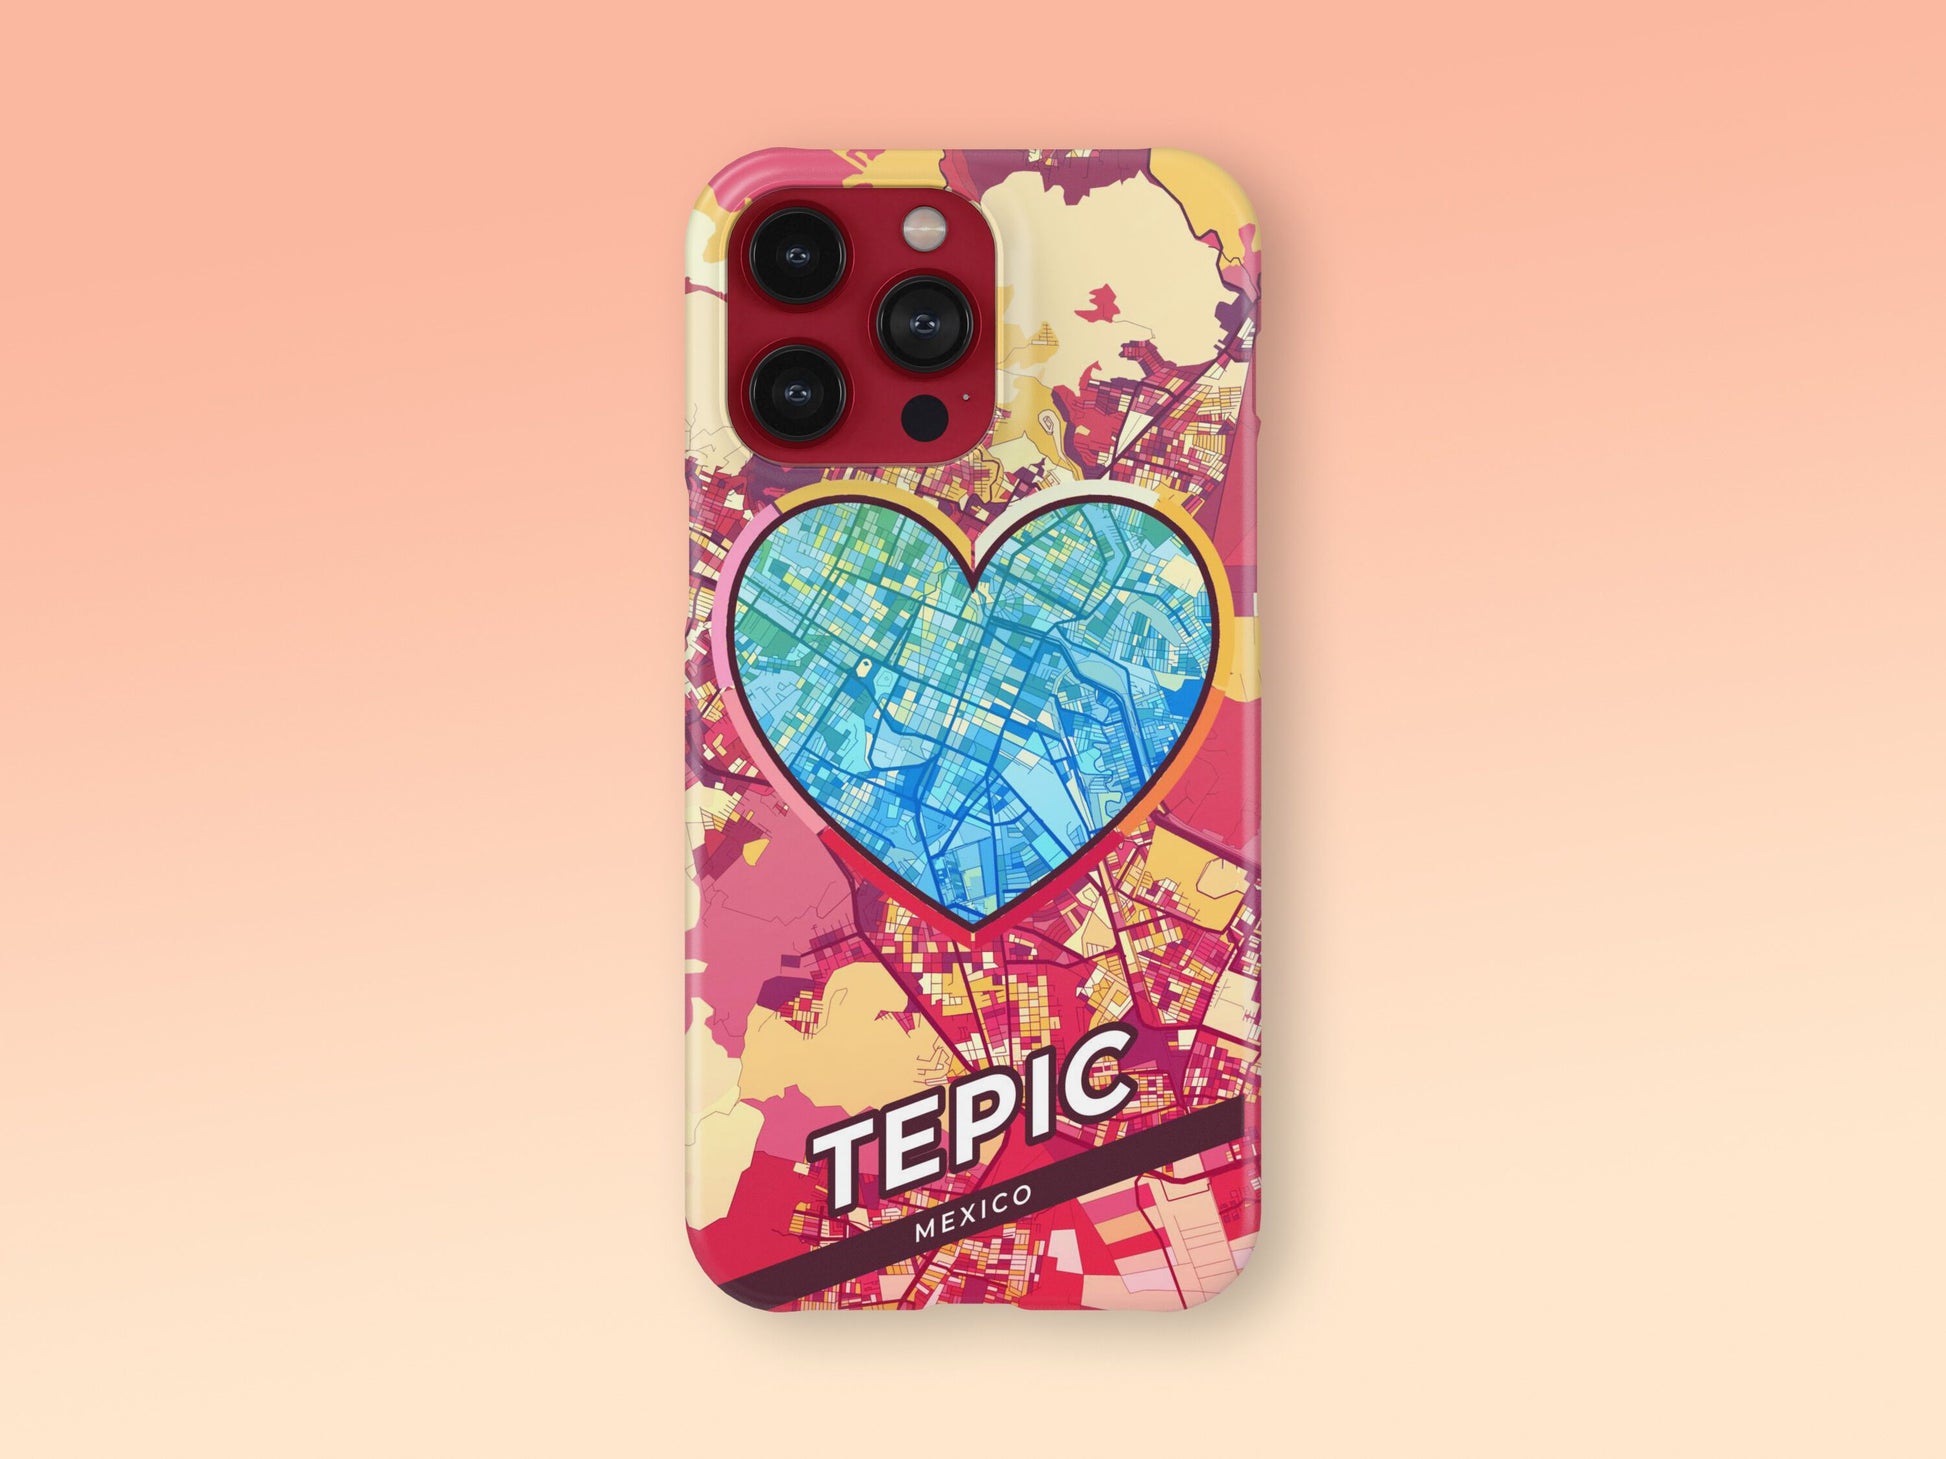 Tepic Mexico slim phone case with colorful icon 2